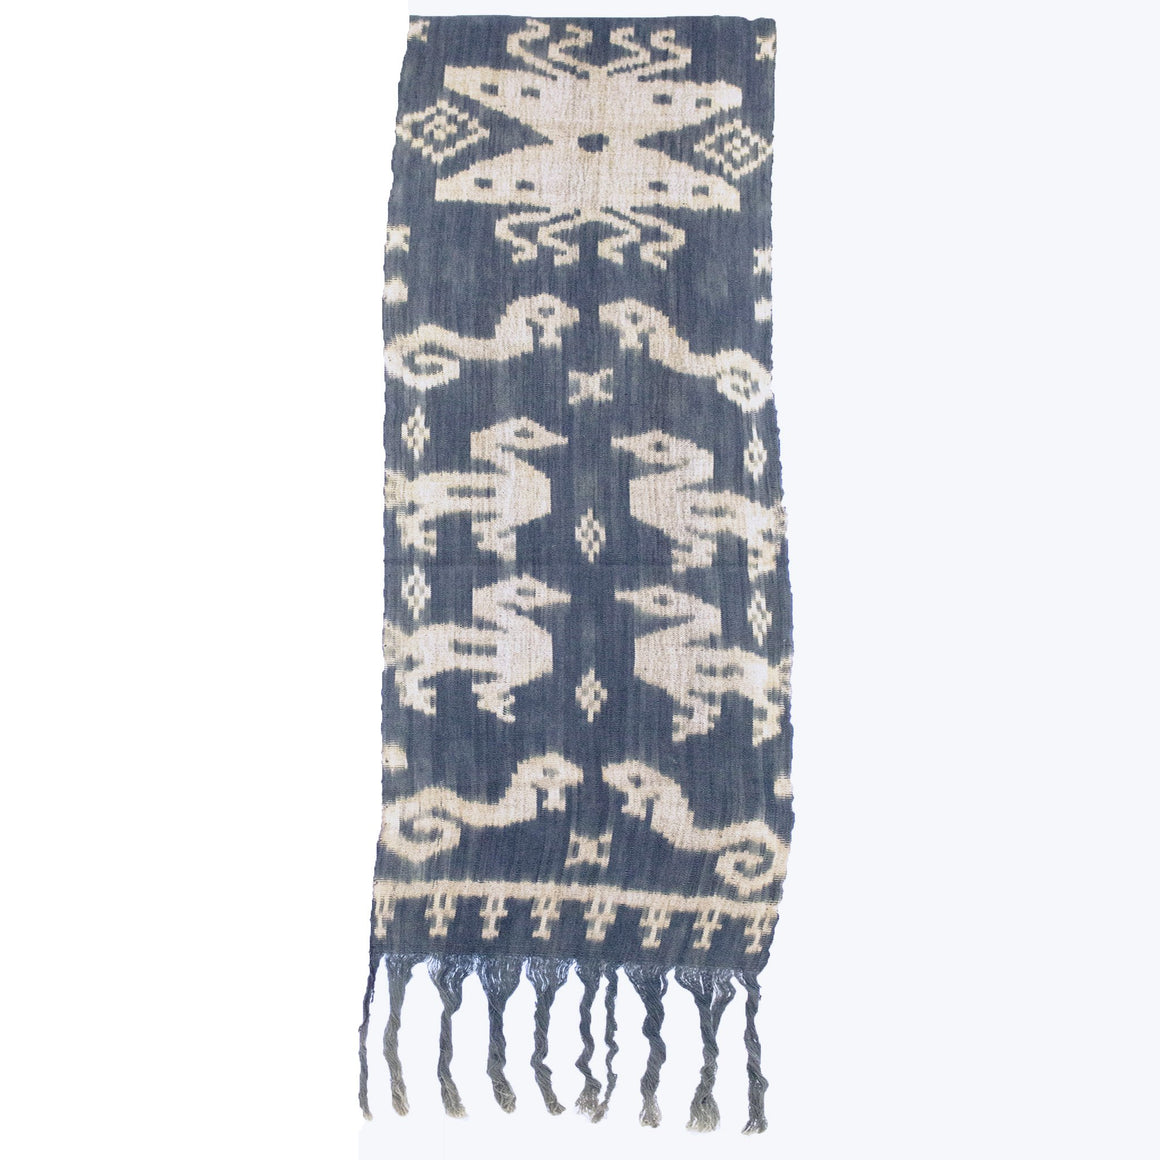 INDIGO & CREAM HAND WOVEN ~ HAND DYED 100% IKAT SCARF SCARVES - BALI ZENZOEY JEWELRY & ACCESSORIES 